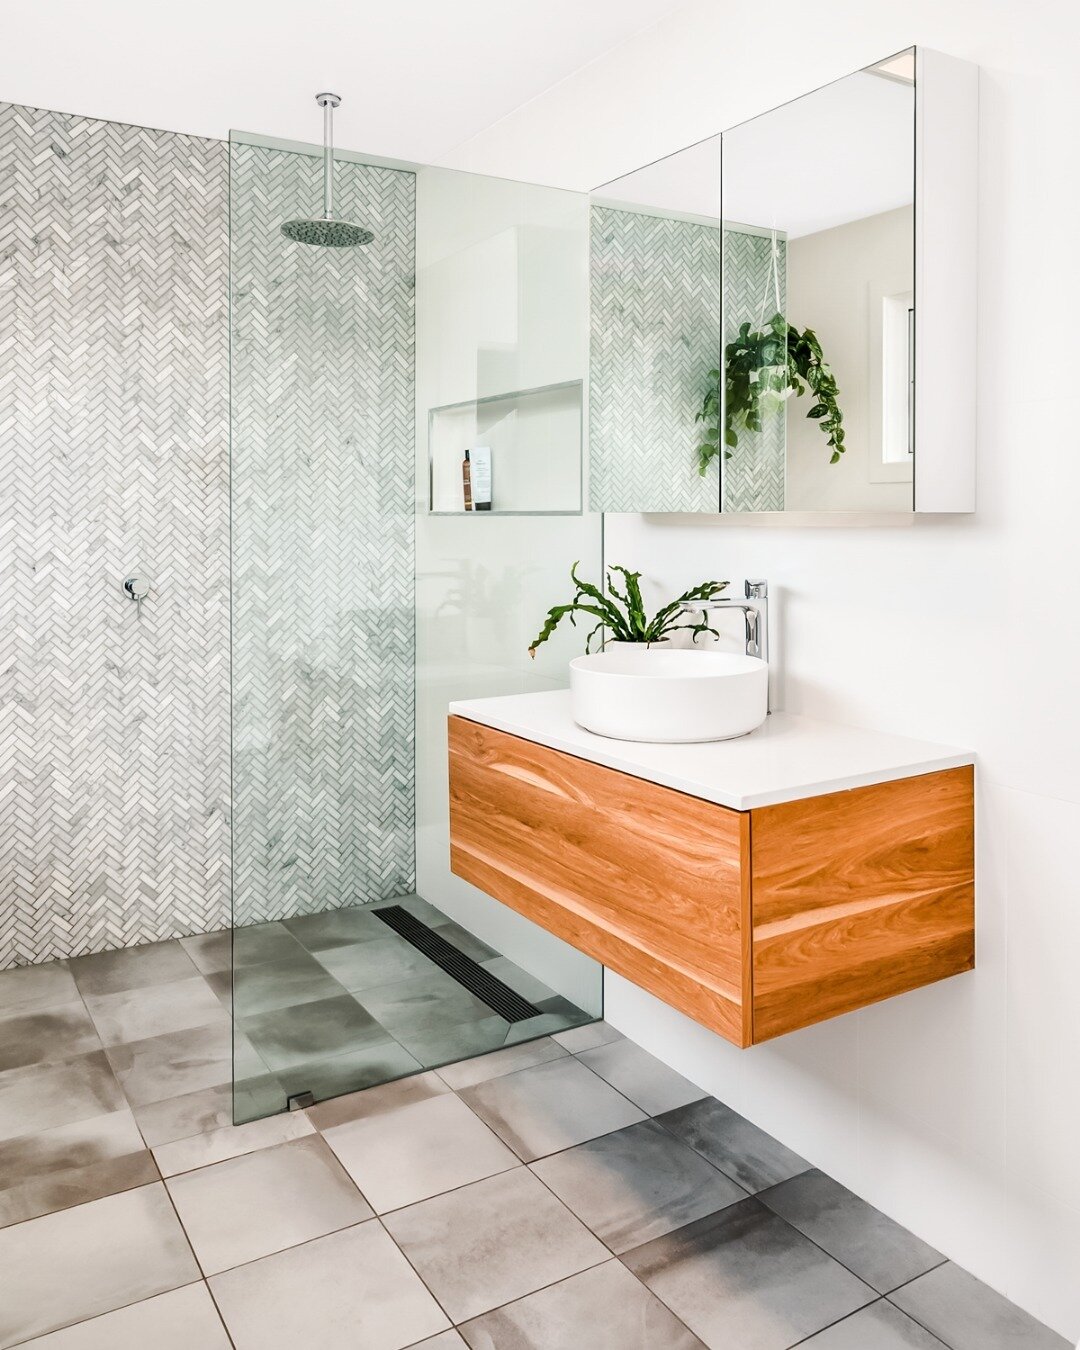 This is your sign to renovate your bathroom! 🌿🛁 

Our Medcalf St. Build's ensuite shower and bath still gives us major bathroom envy. With floor to ceiling herringbone tiles, floating vanity, and double sinks, this space screams luxury. And don't g